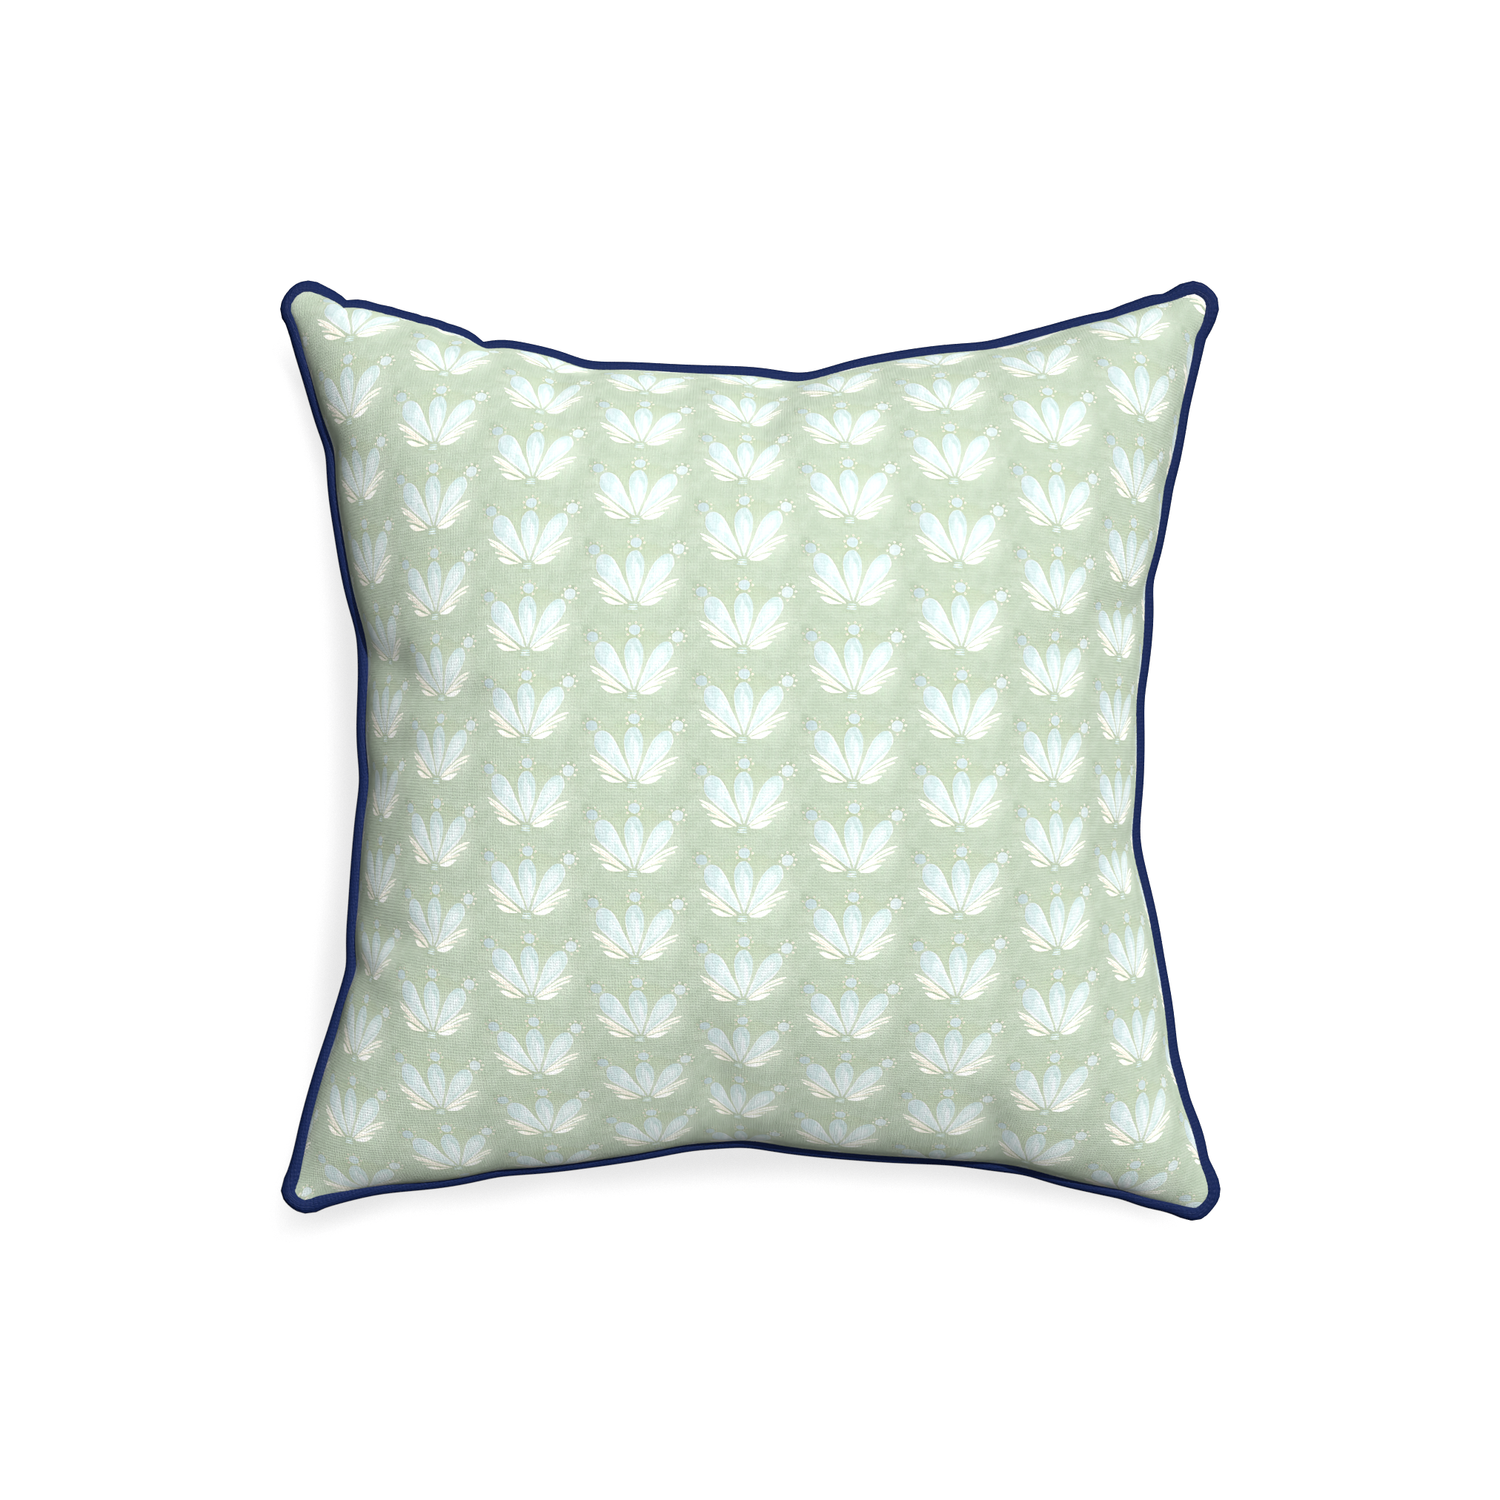 20-square serena sea salt custom blue & green floral drop repeatpillow with midnight piping on white background